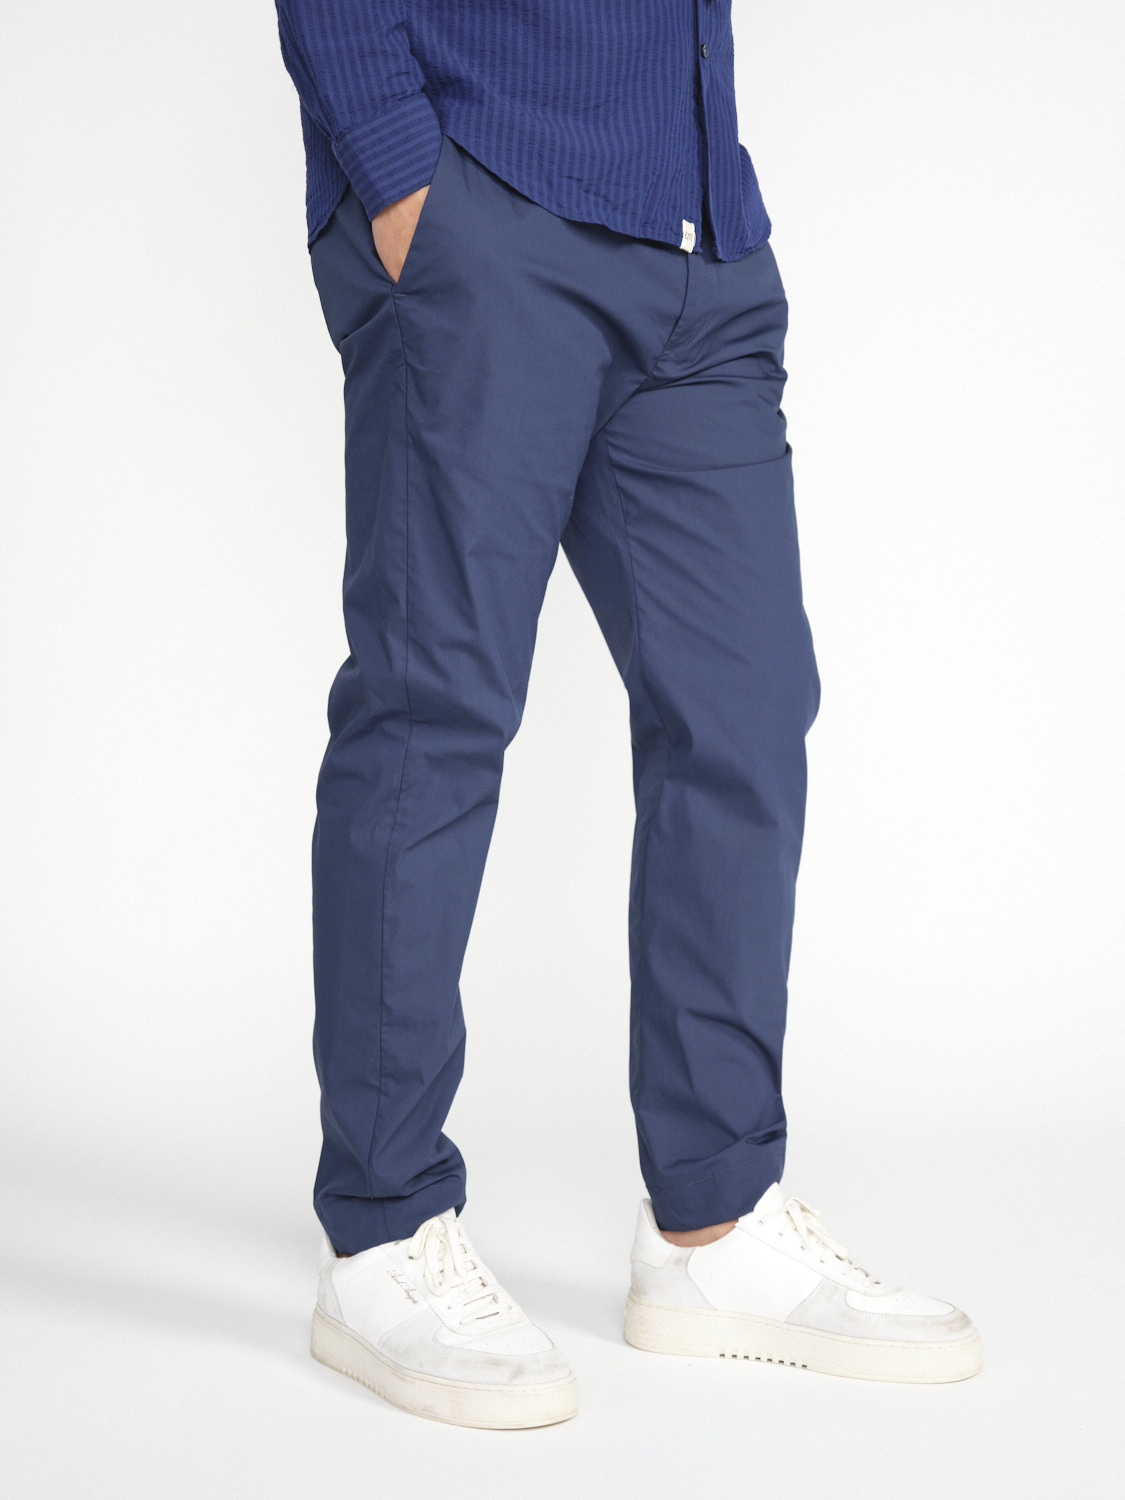 nine in the morning Yoga – cotton blend trousers in chino style  marine 46